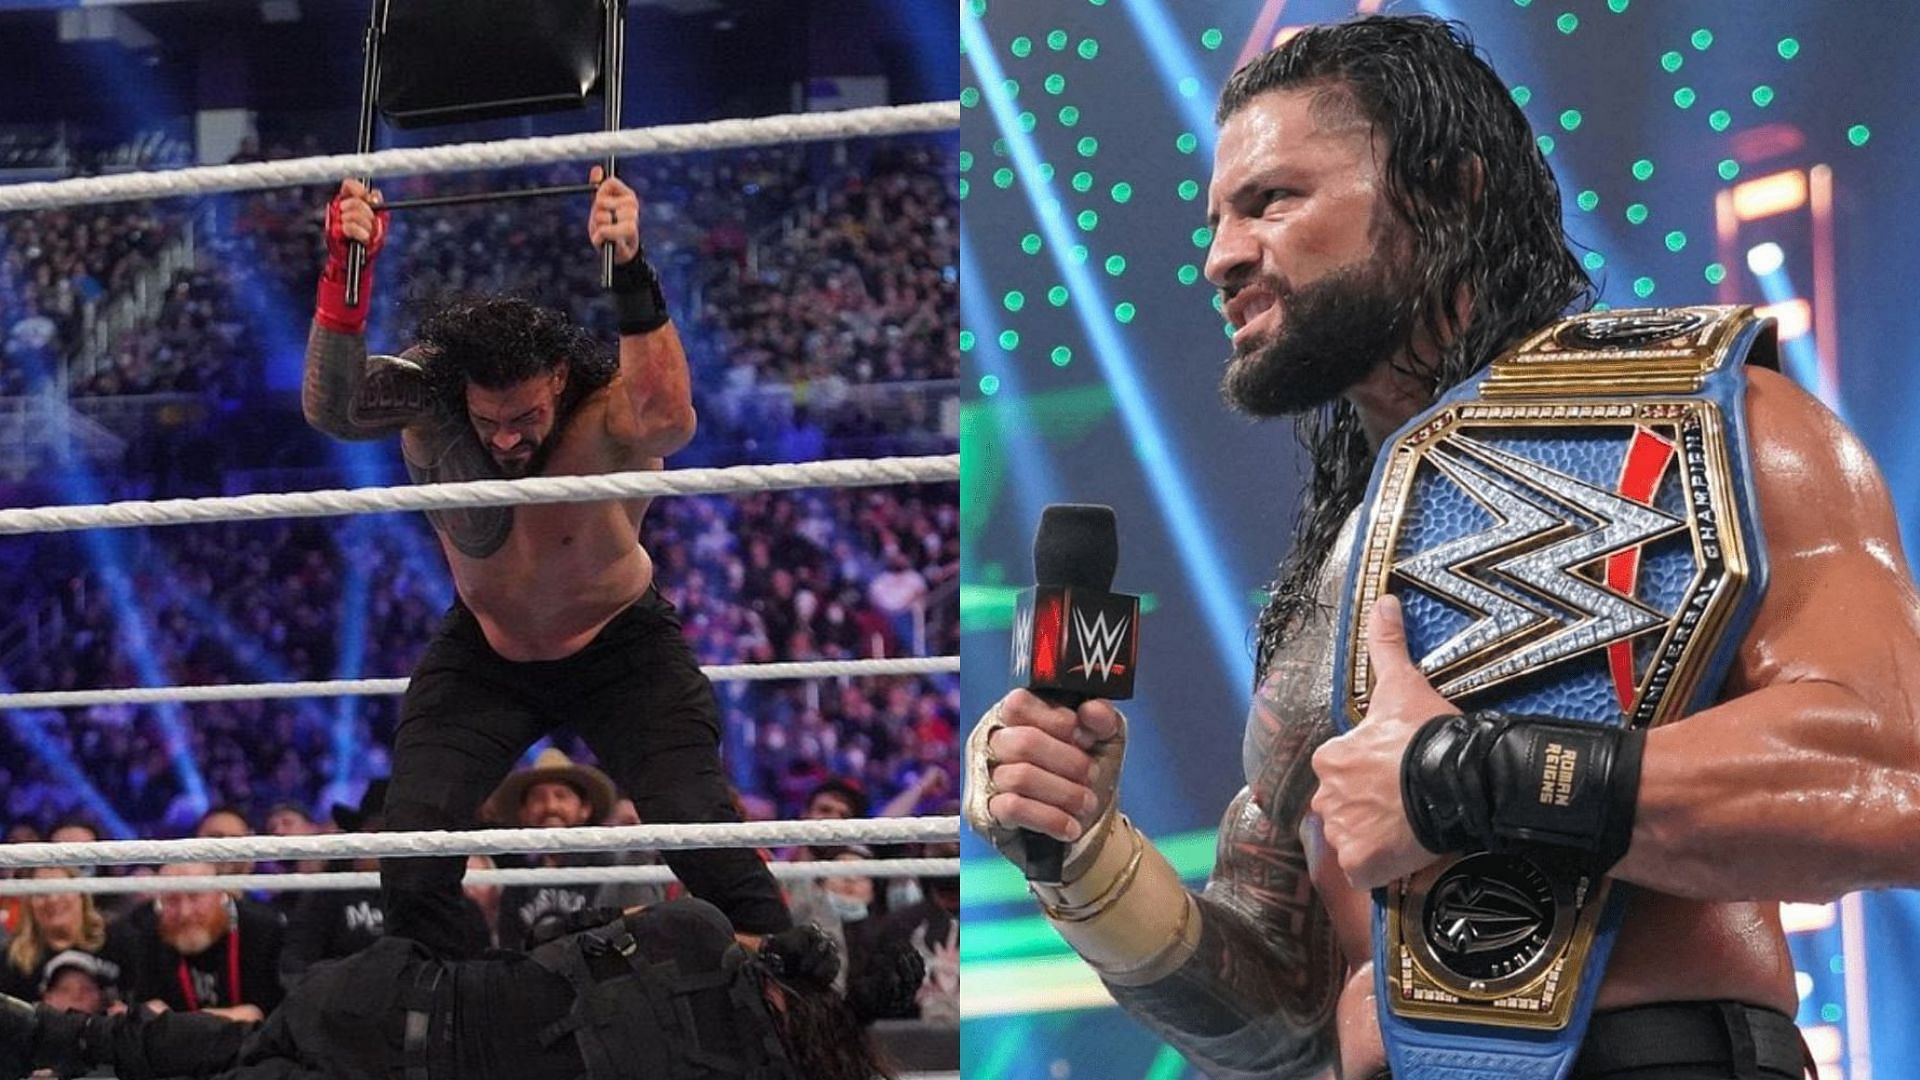 Roman Reigns retained the Universal Championship against Seth Rollins at Royal Rumble 2022